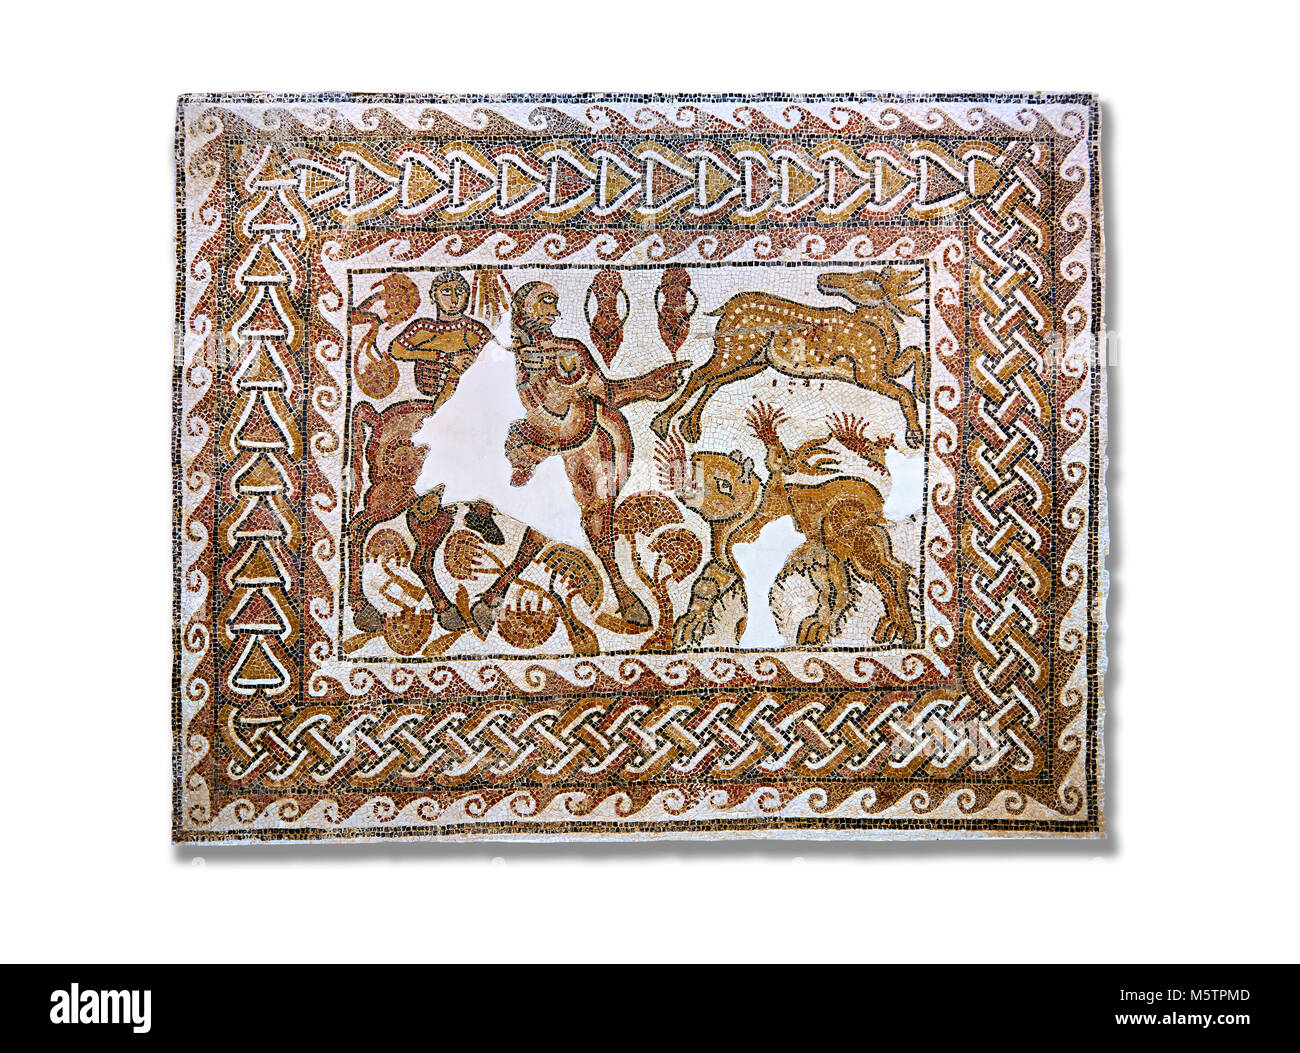 Roman mosaic depicting The Education of Achilles by the Centaur Chiron. Achilles , left, is depicted riding a centaur ( mosaic of its body s missing)  Stock Photo